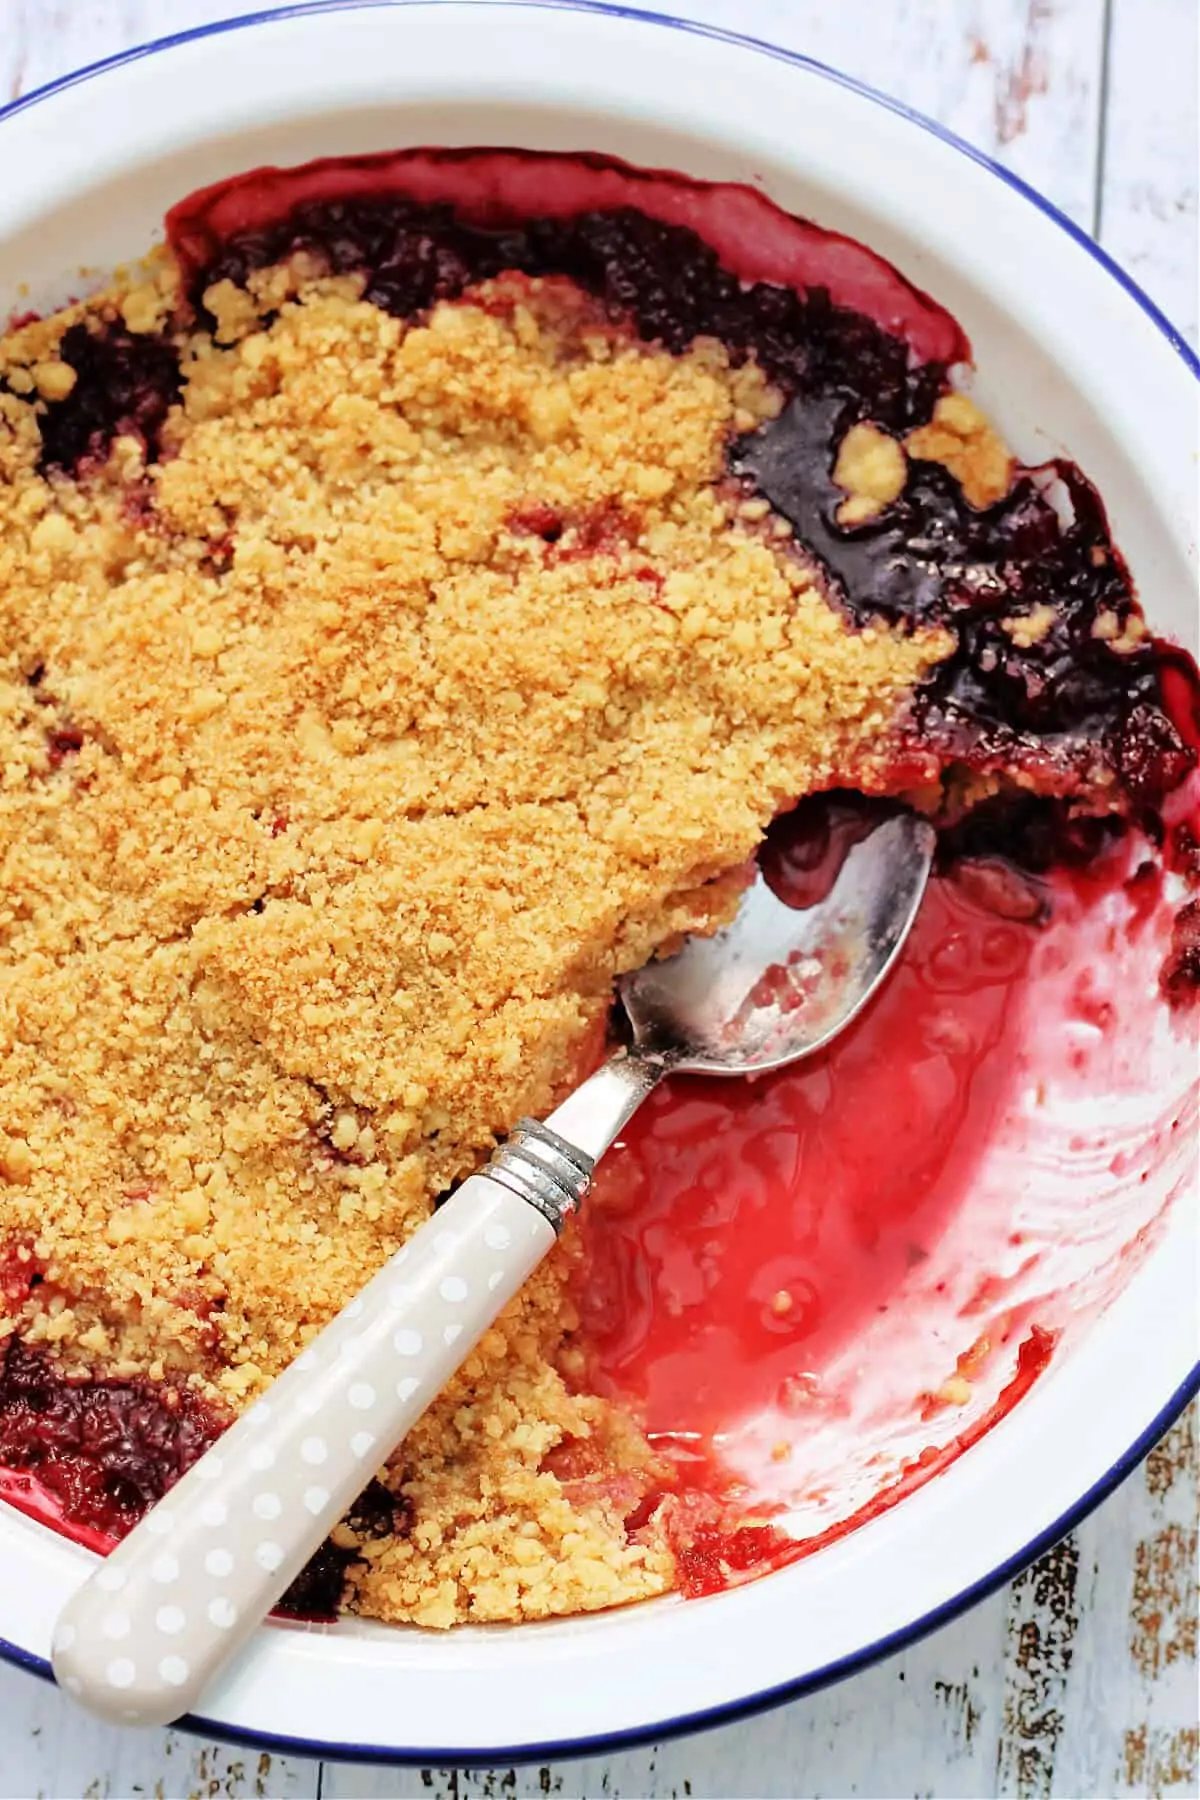 A white ceramic bowl with blue edge containing berry crumble with juices oozing out, with a serving spoon.